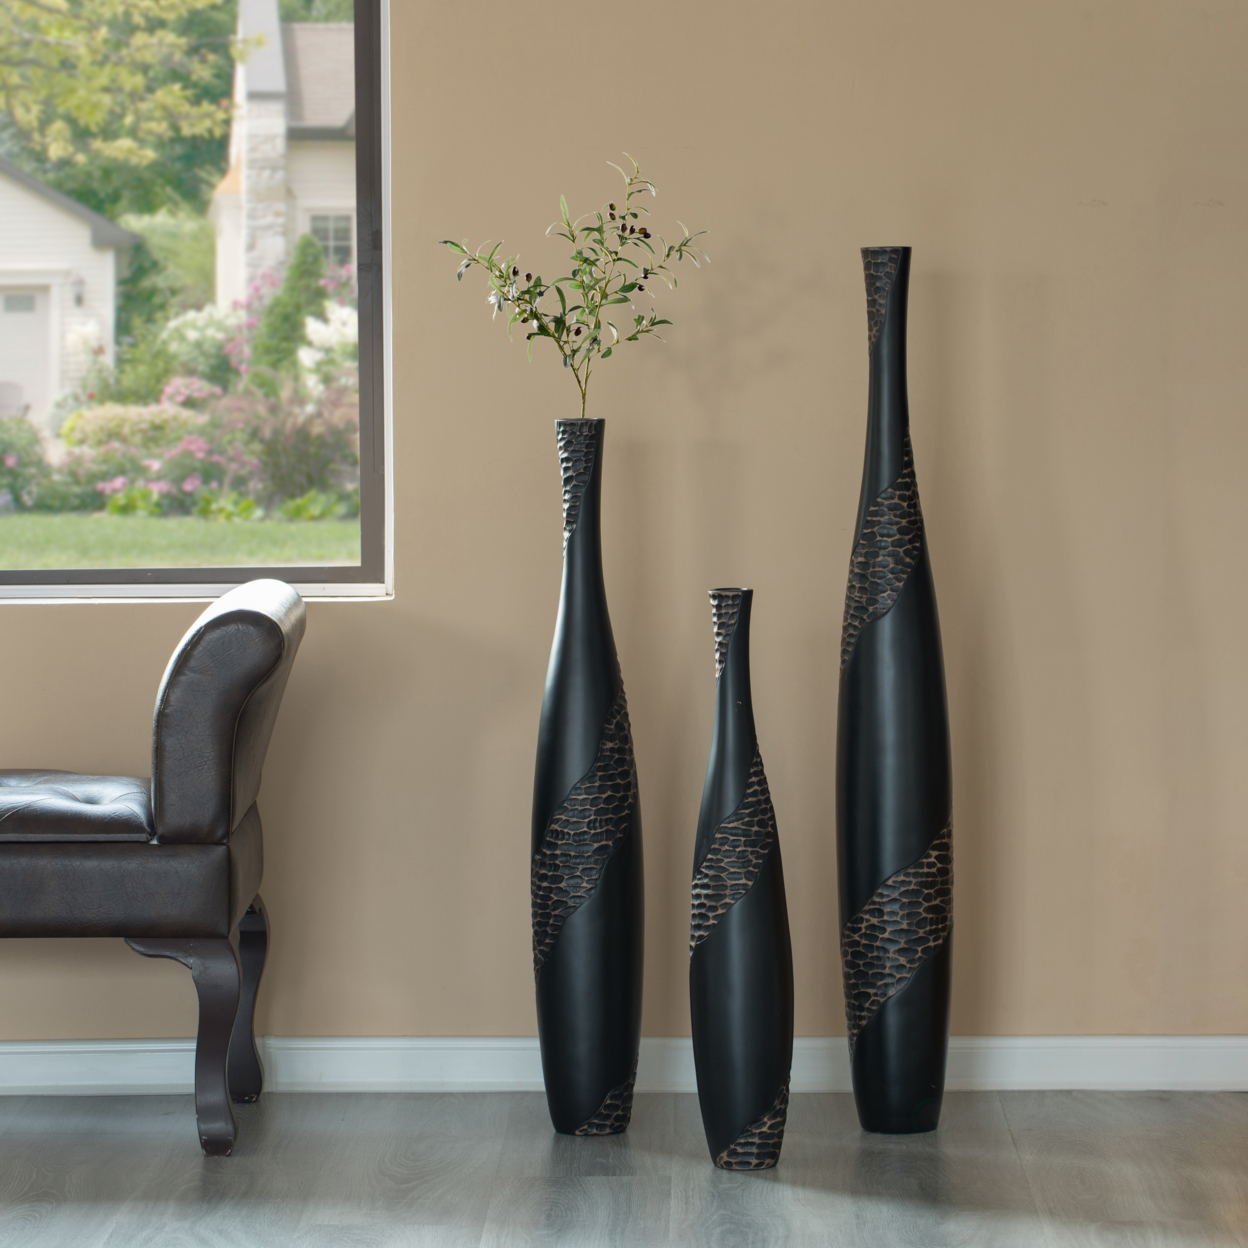 Contemporary Bottle Shape Decorative Floor Vase, Brown With Cobbled Stone Pattern - Set Of 3